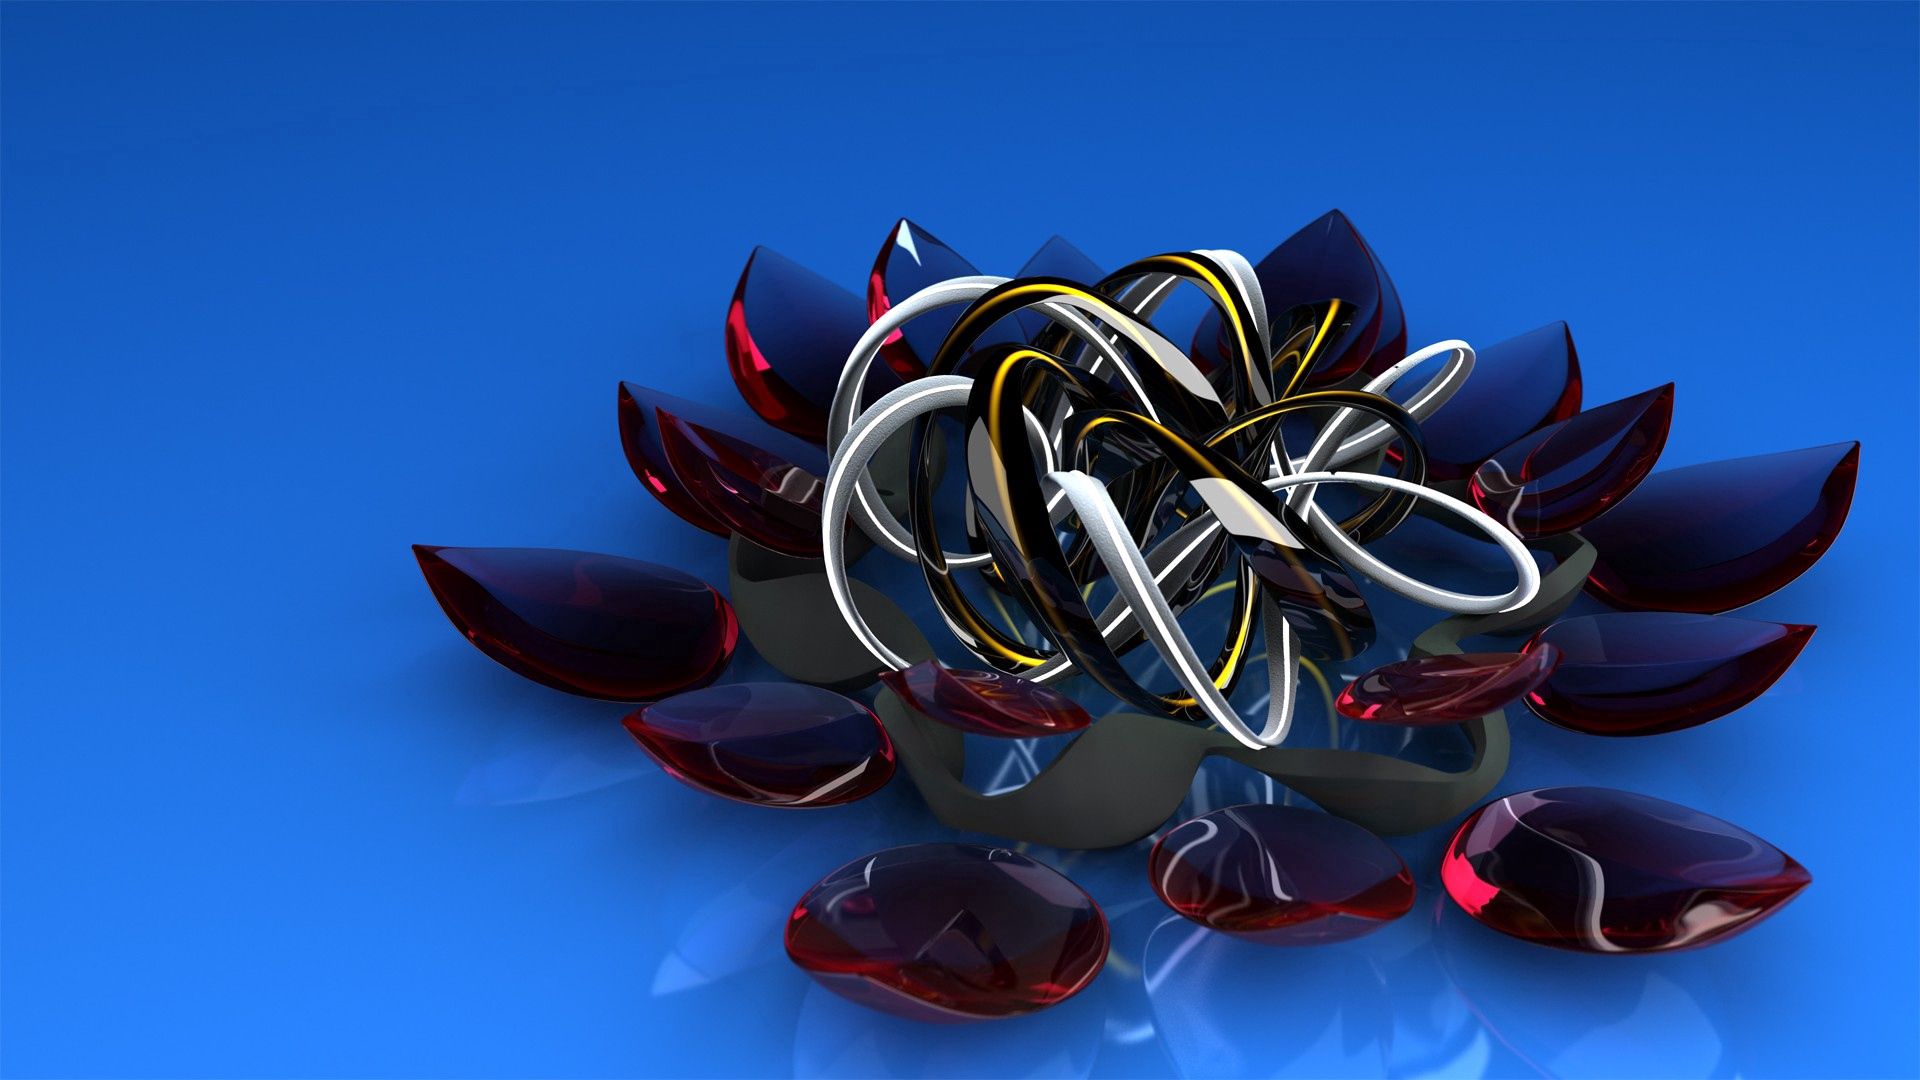 103116 2560x1080 PC pictures for free, download figurine, flower, 3d, metal 2560x1080 wallpapers on your desktop